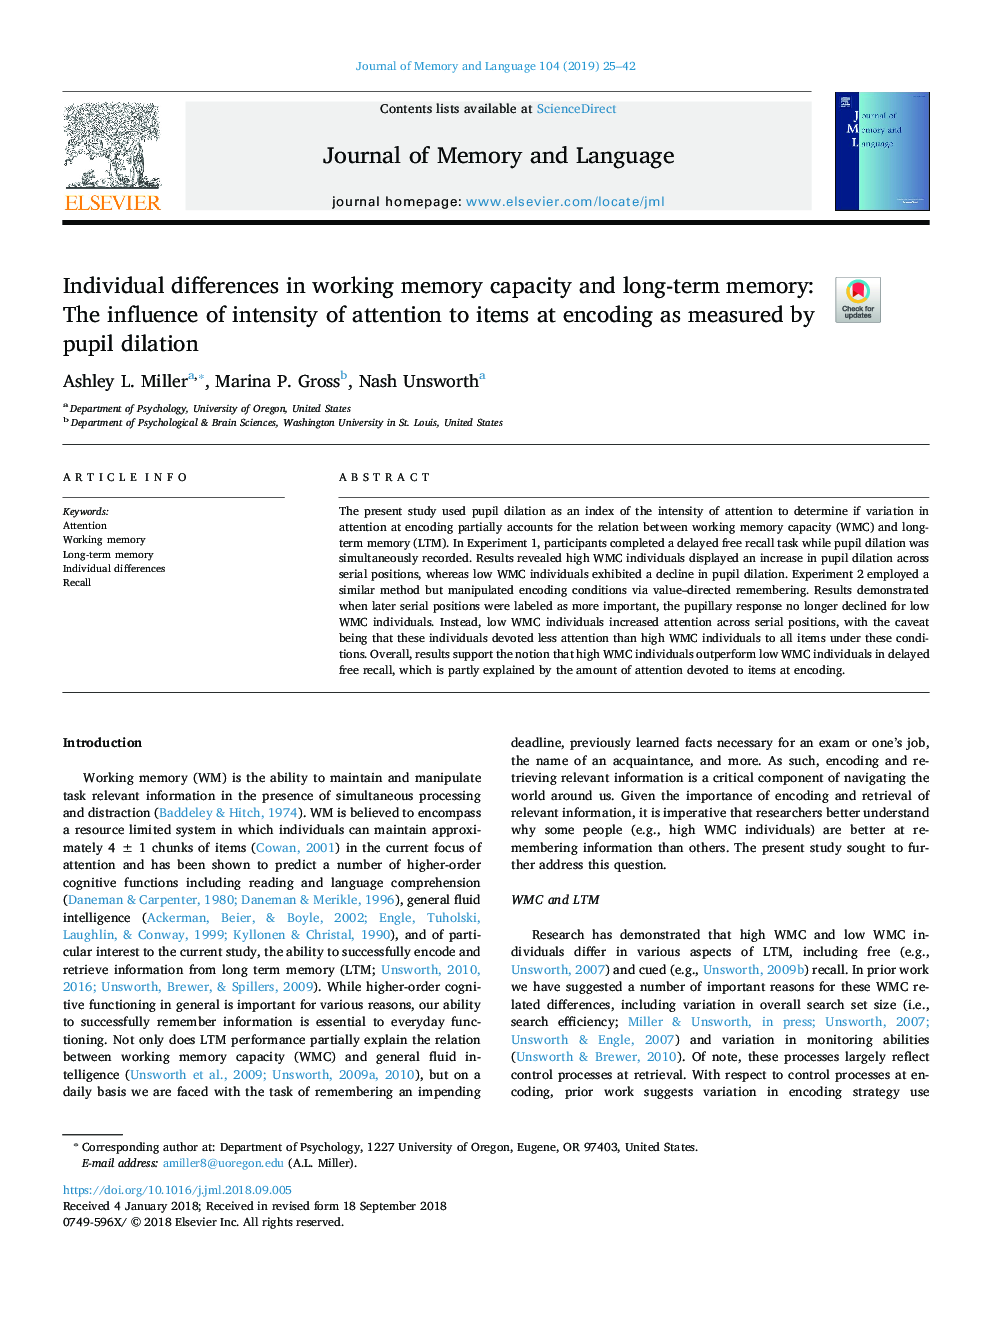 Individual differences in working memory capacity and long-term memory: The influence of intensity of attention to items at encoding as measured by pupil dilation